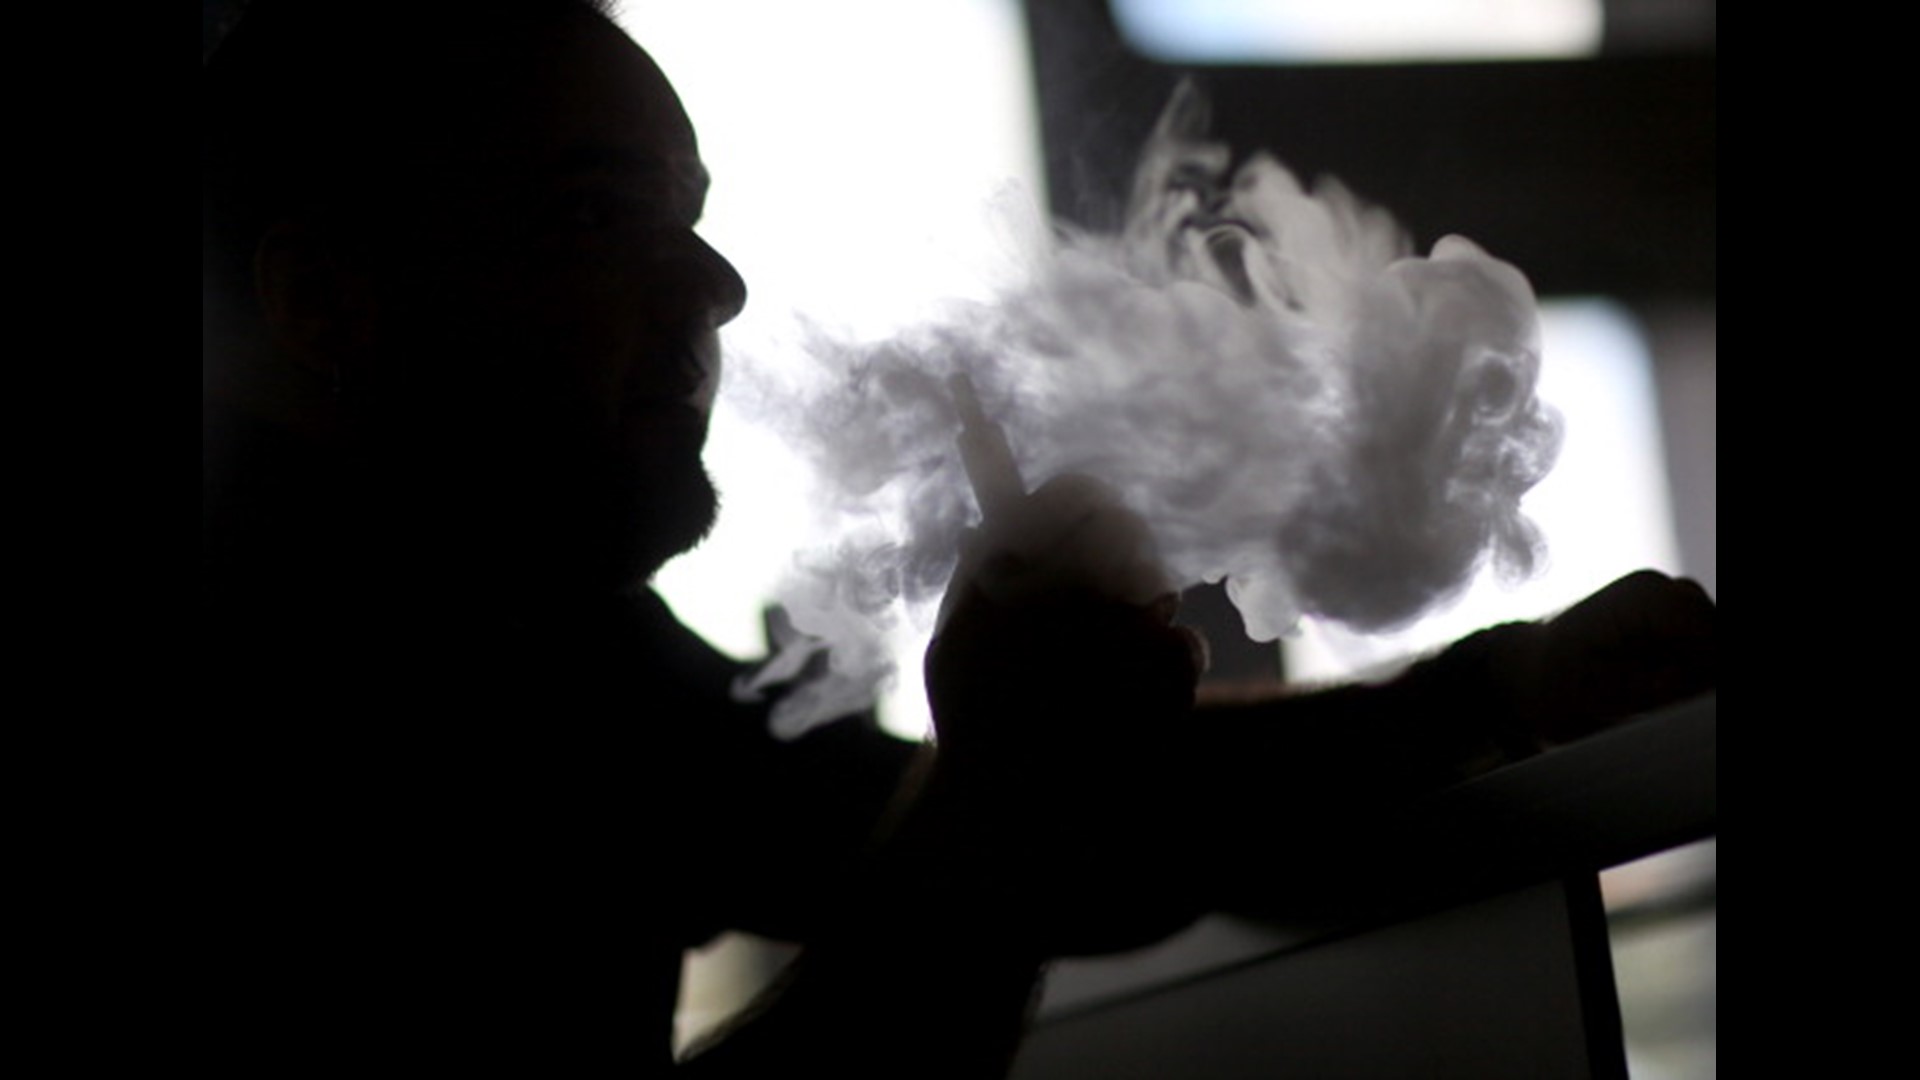 Colorado joins 16 other states where health officials are looking into dozens of cases where people have breathing issues related to vaping.